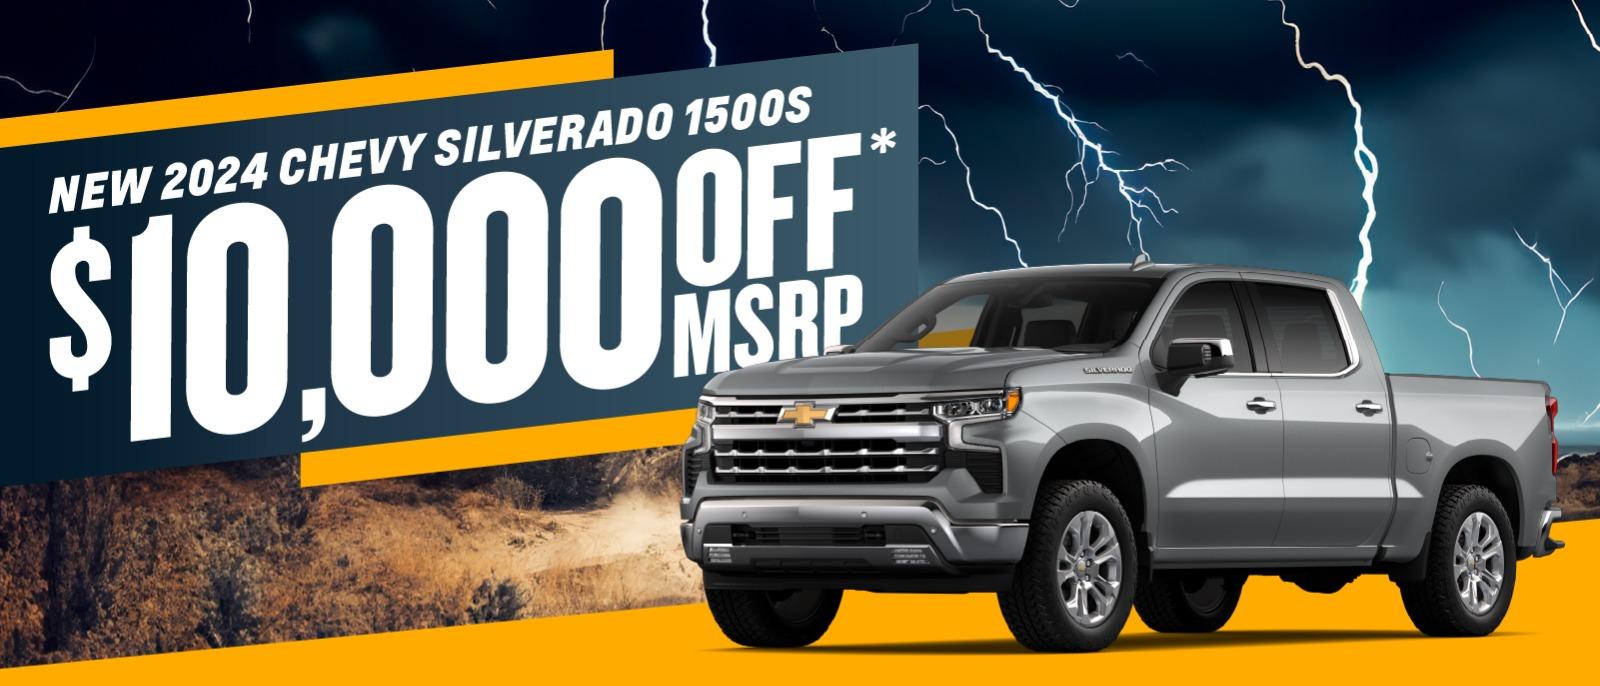 Up to $10,000 OFF MSRP on 2024 Silverado's